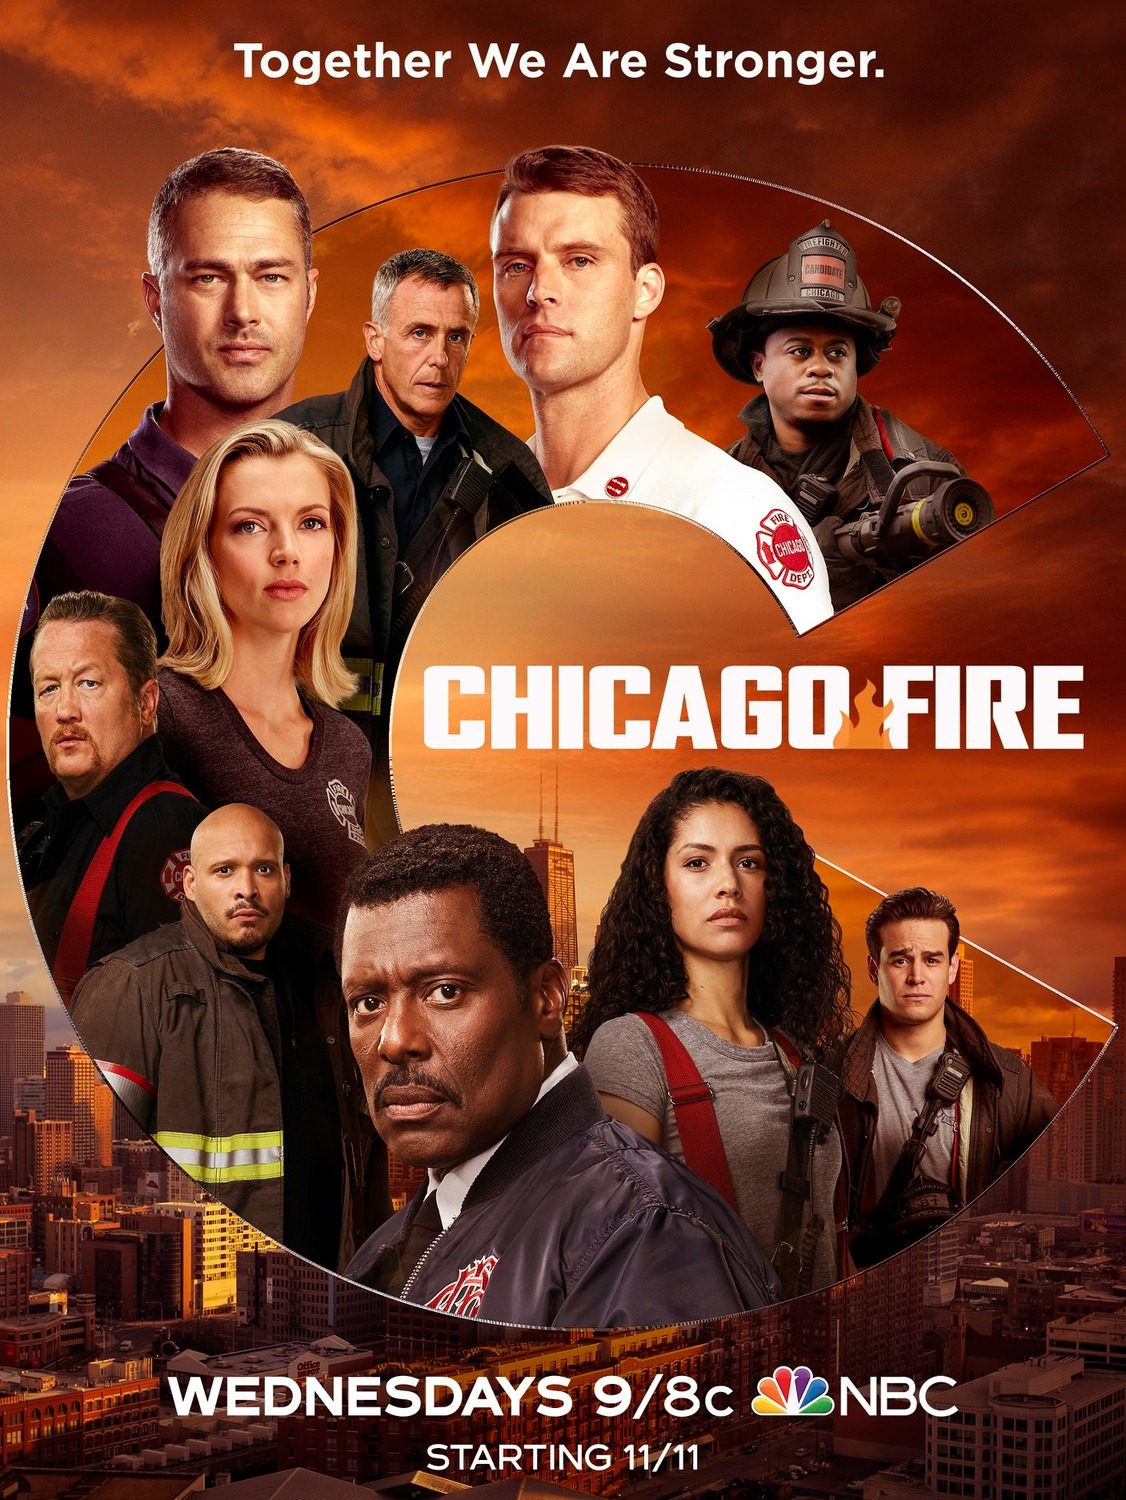 Extra Large TV Poster Image for Chicago Fire (#6 of 7)